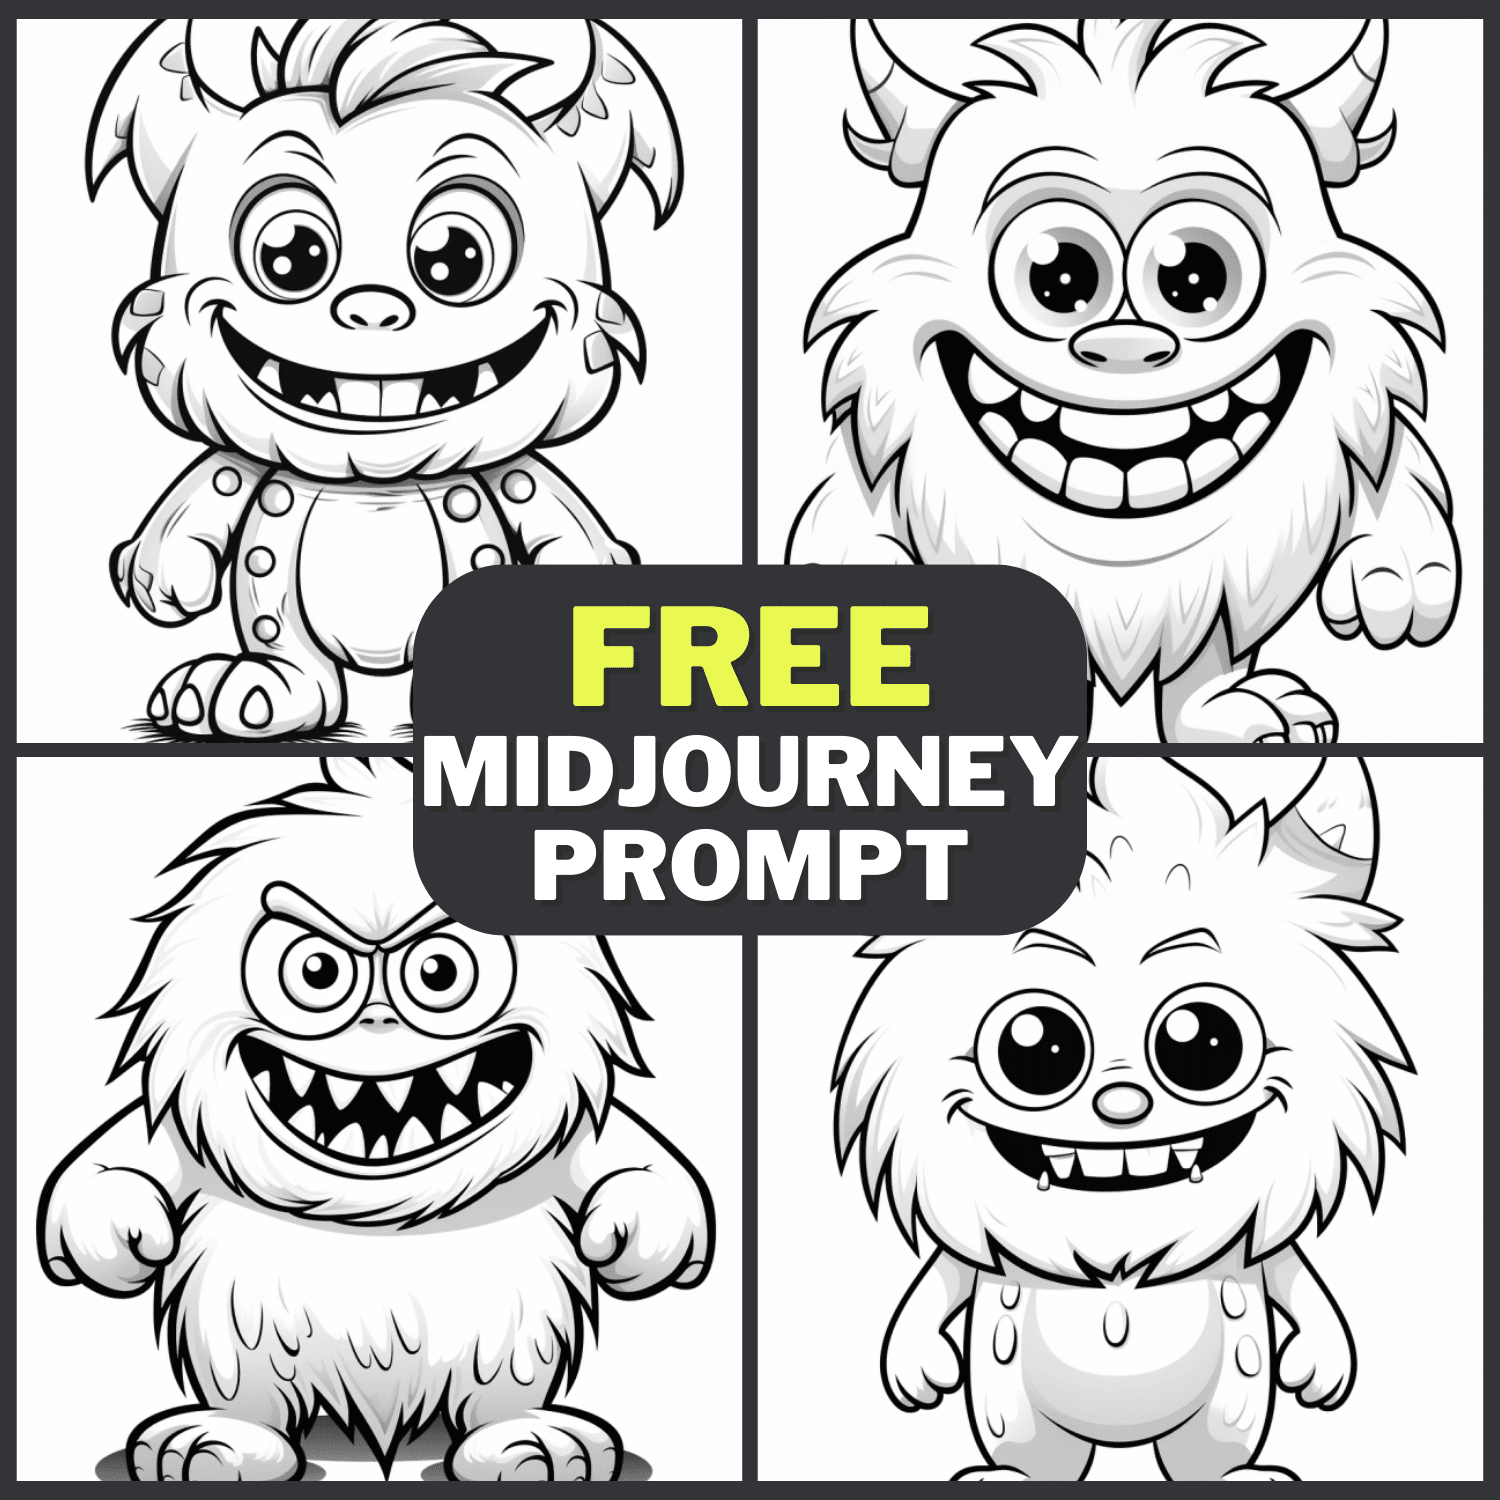 Cute Cartoon Monster Coloring Page Free Midjourney Prompt 1